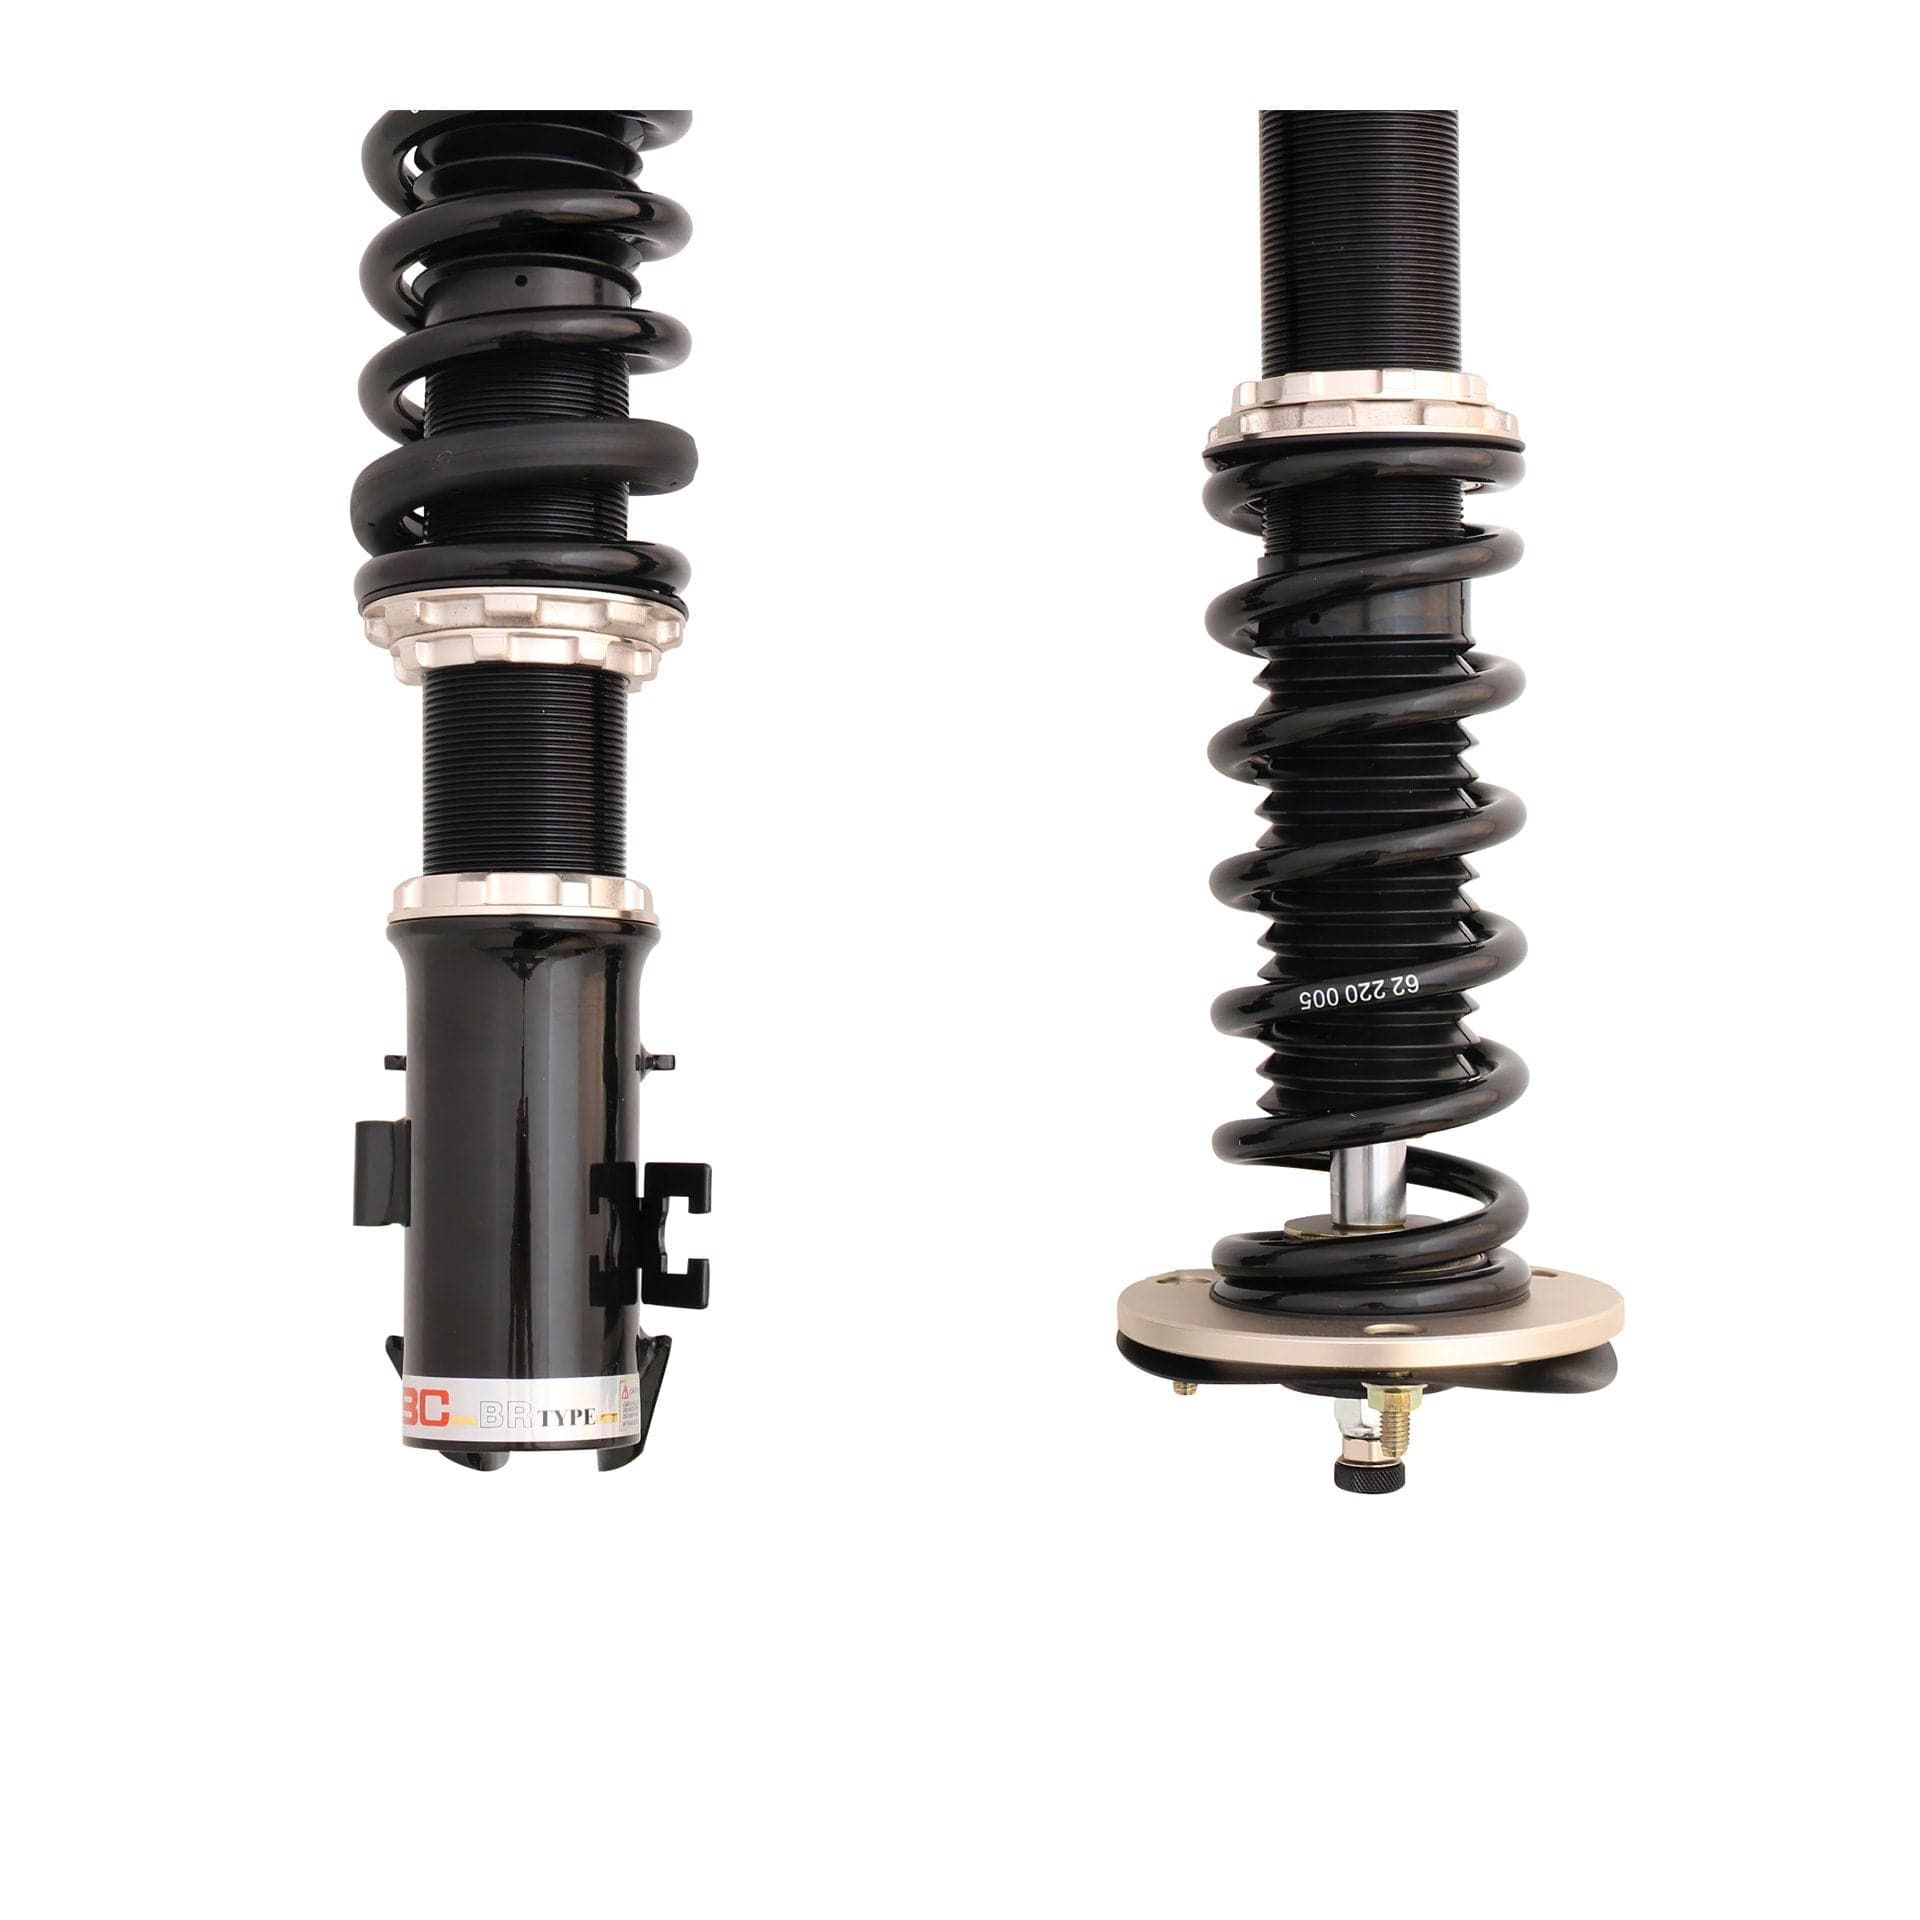 BC Racing BR Coilovers for 90-94 Subaru Legacy